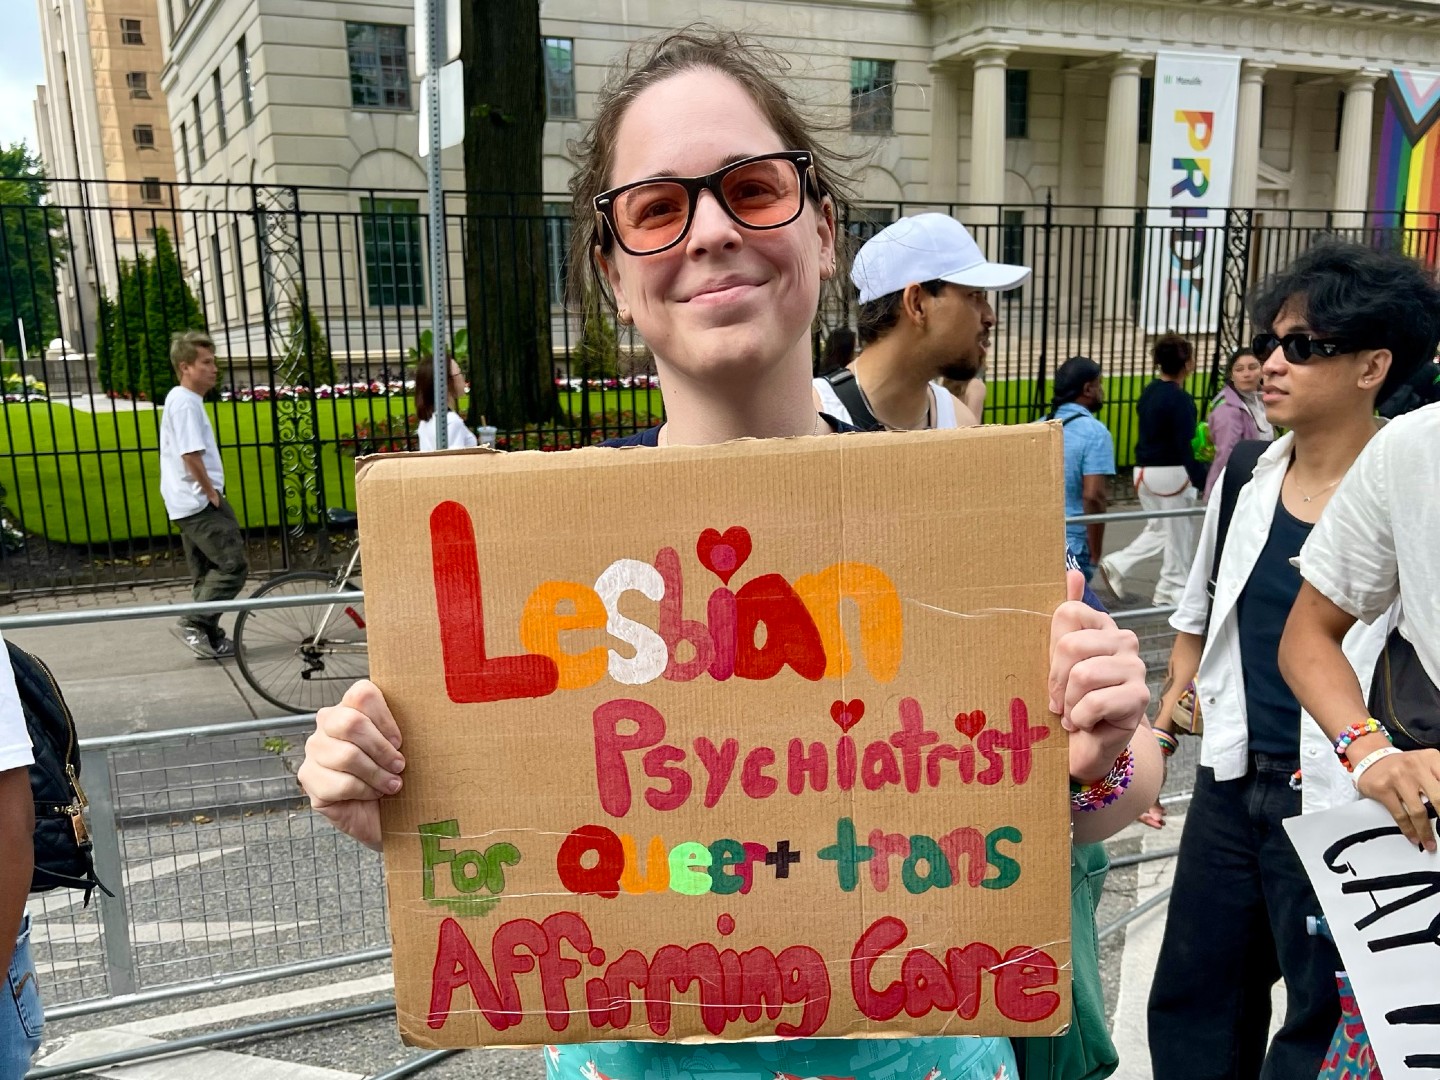 A woman wearing a long light blue dress and pink-tinted sunglasses smiles and holds a sign that reads, “Lesbian psychiatrist for Queer + trans Affirming Care.”